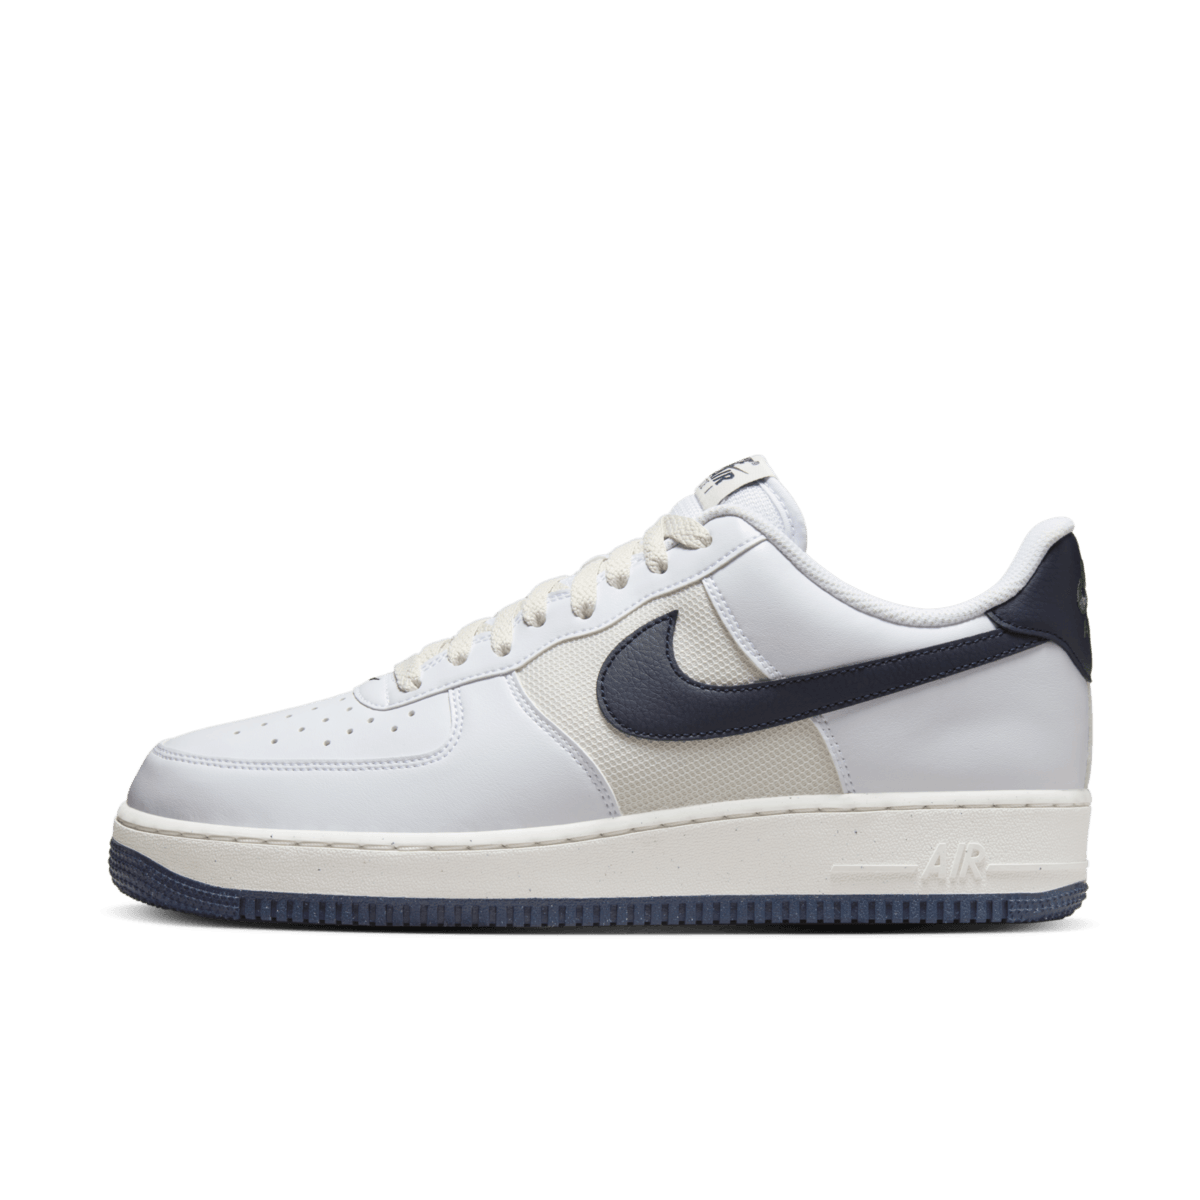 Nike Air Force 1 '07 'Obsidian' - Next Nature HF4298-100